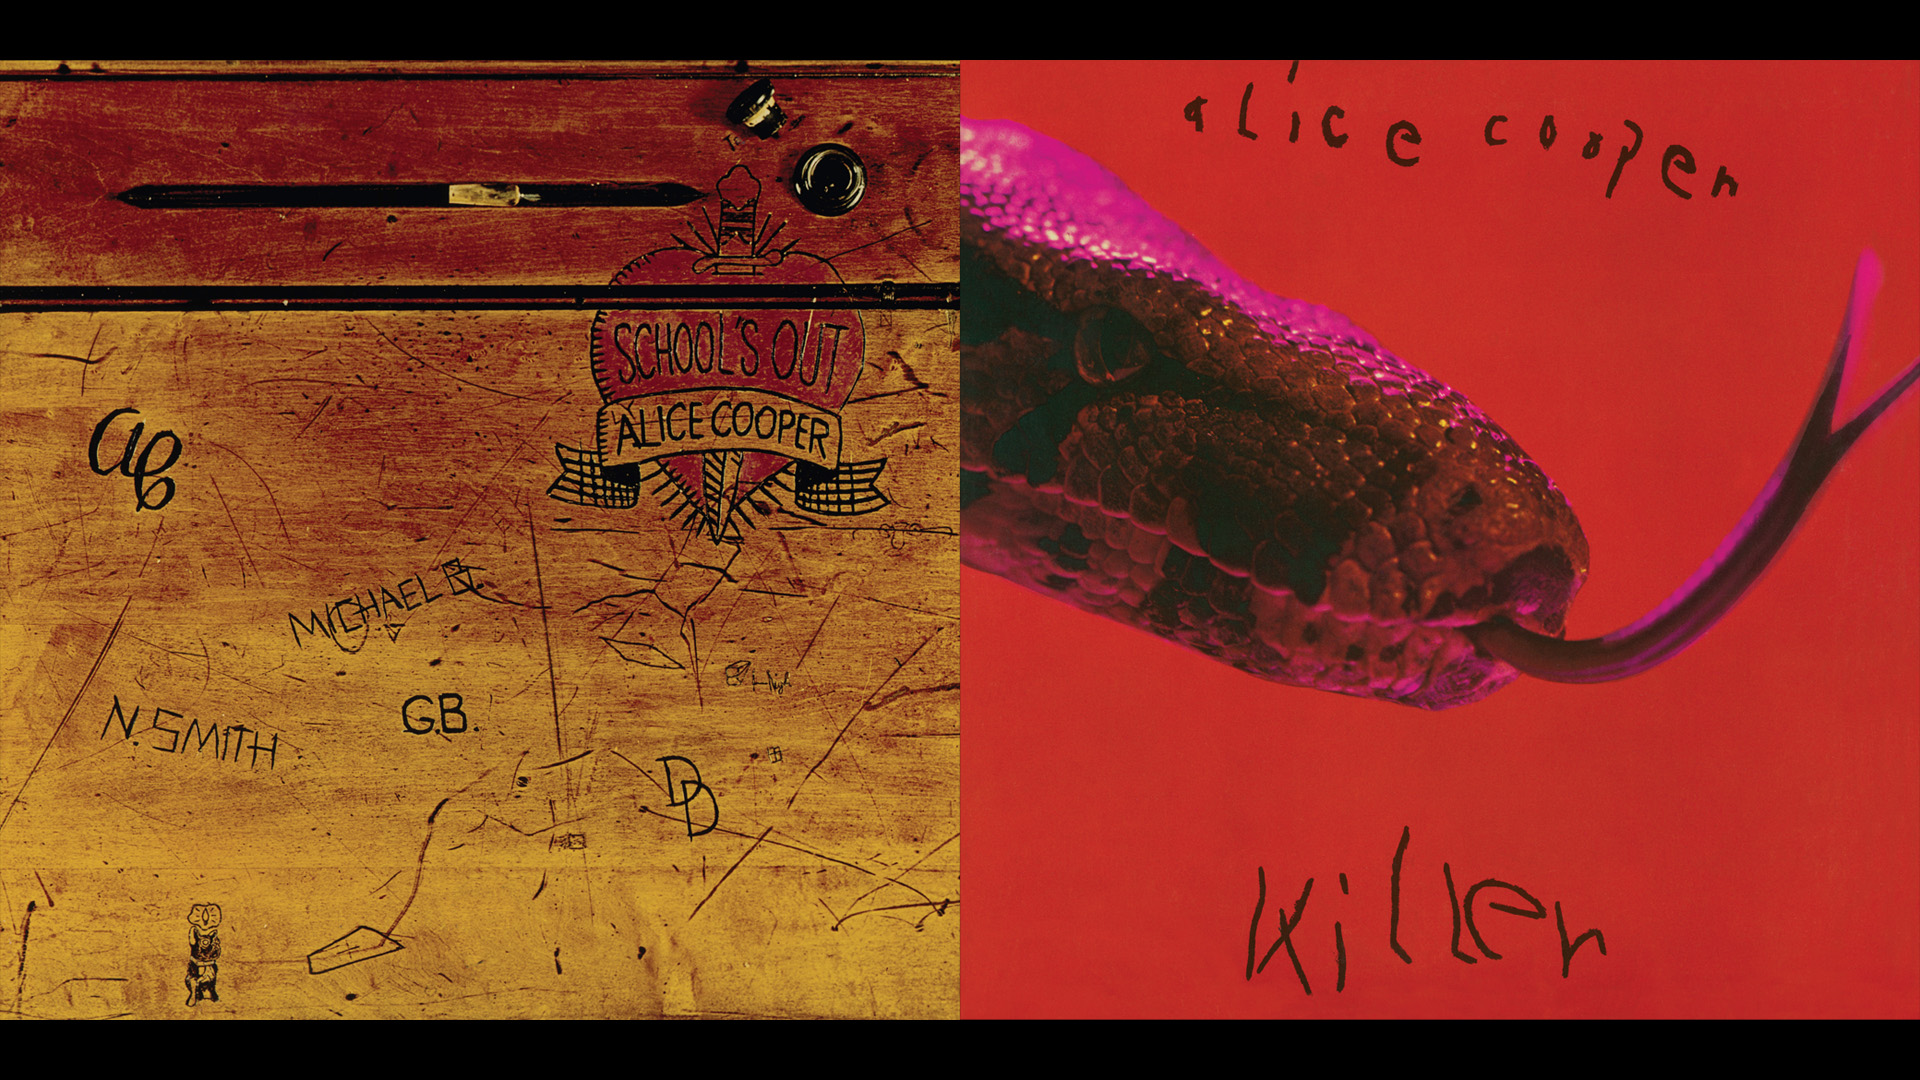 ALICE COOPER SCHOOL’S OUT AND KILLER DELUXE EDITIONS | Alice Cooper